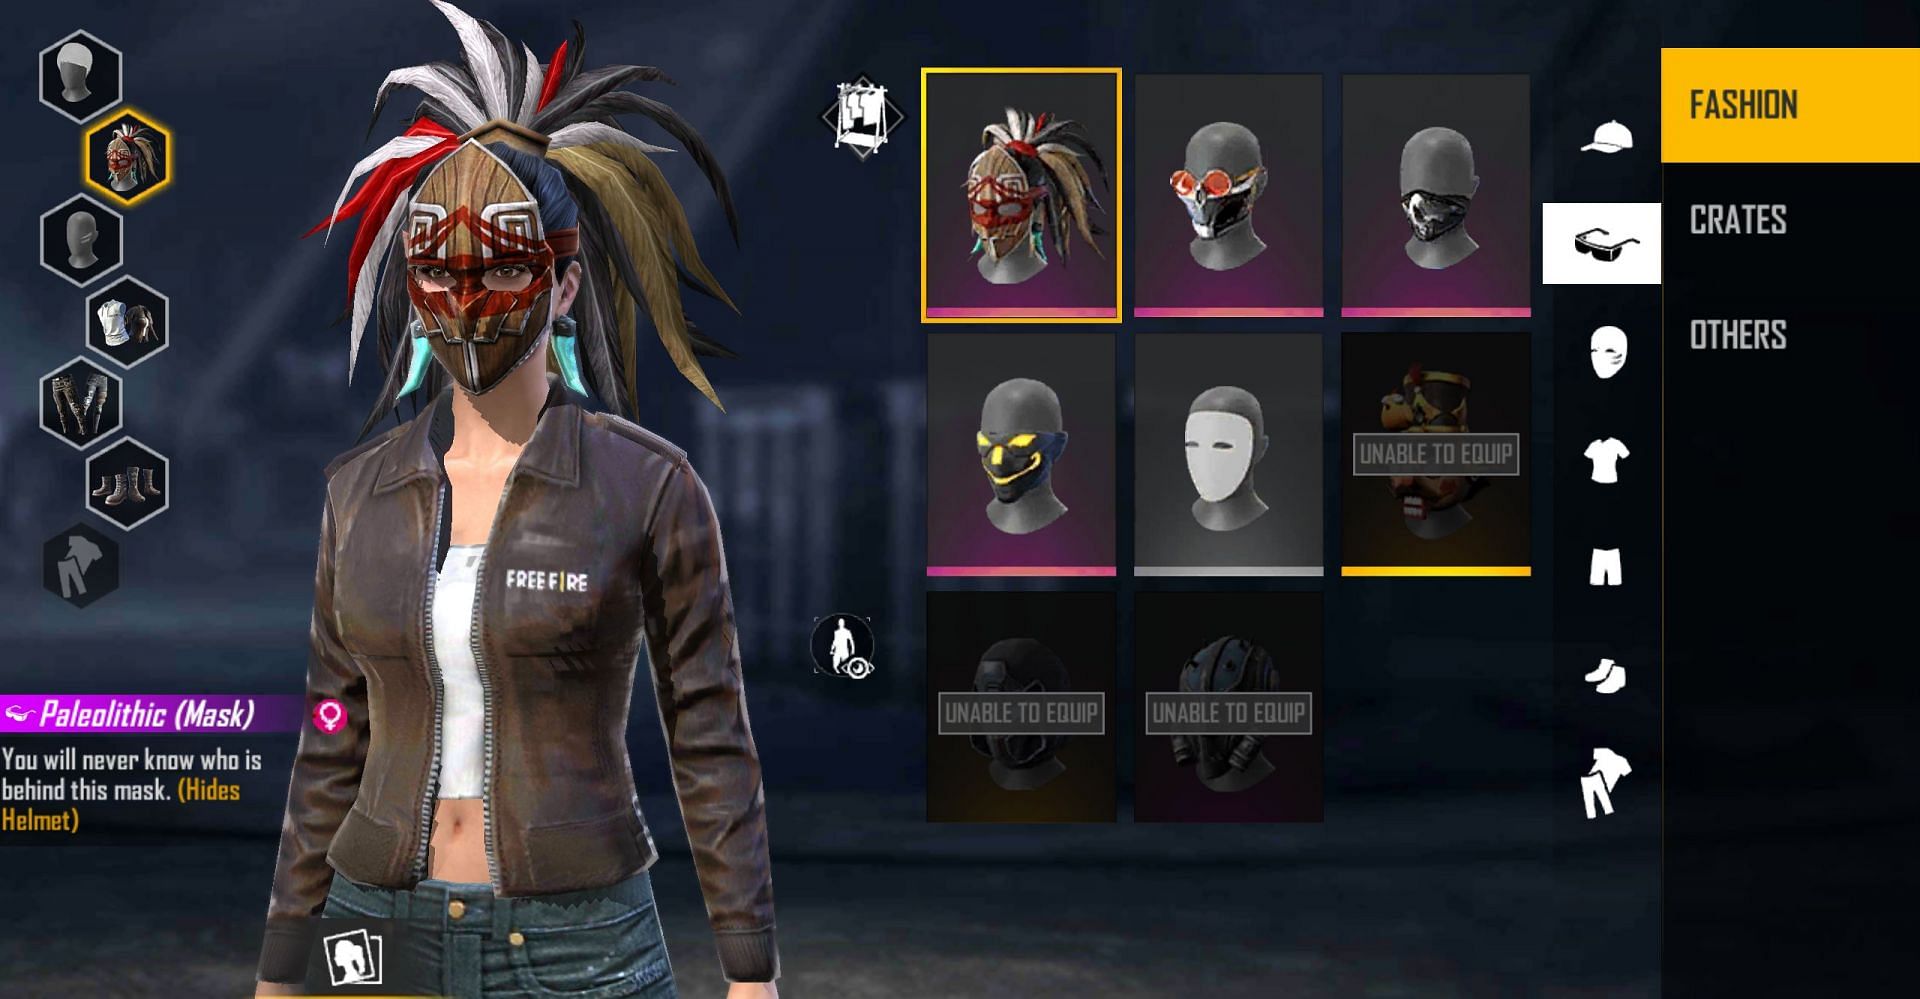 Alongside the mask, players will get a loot crate as well (Image via Fere Fire)